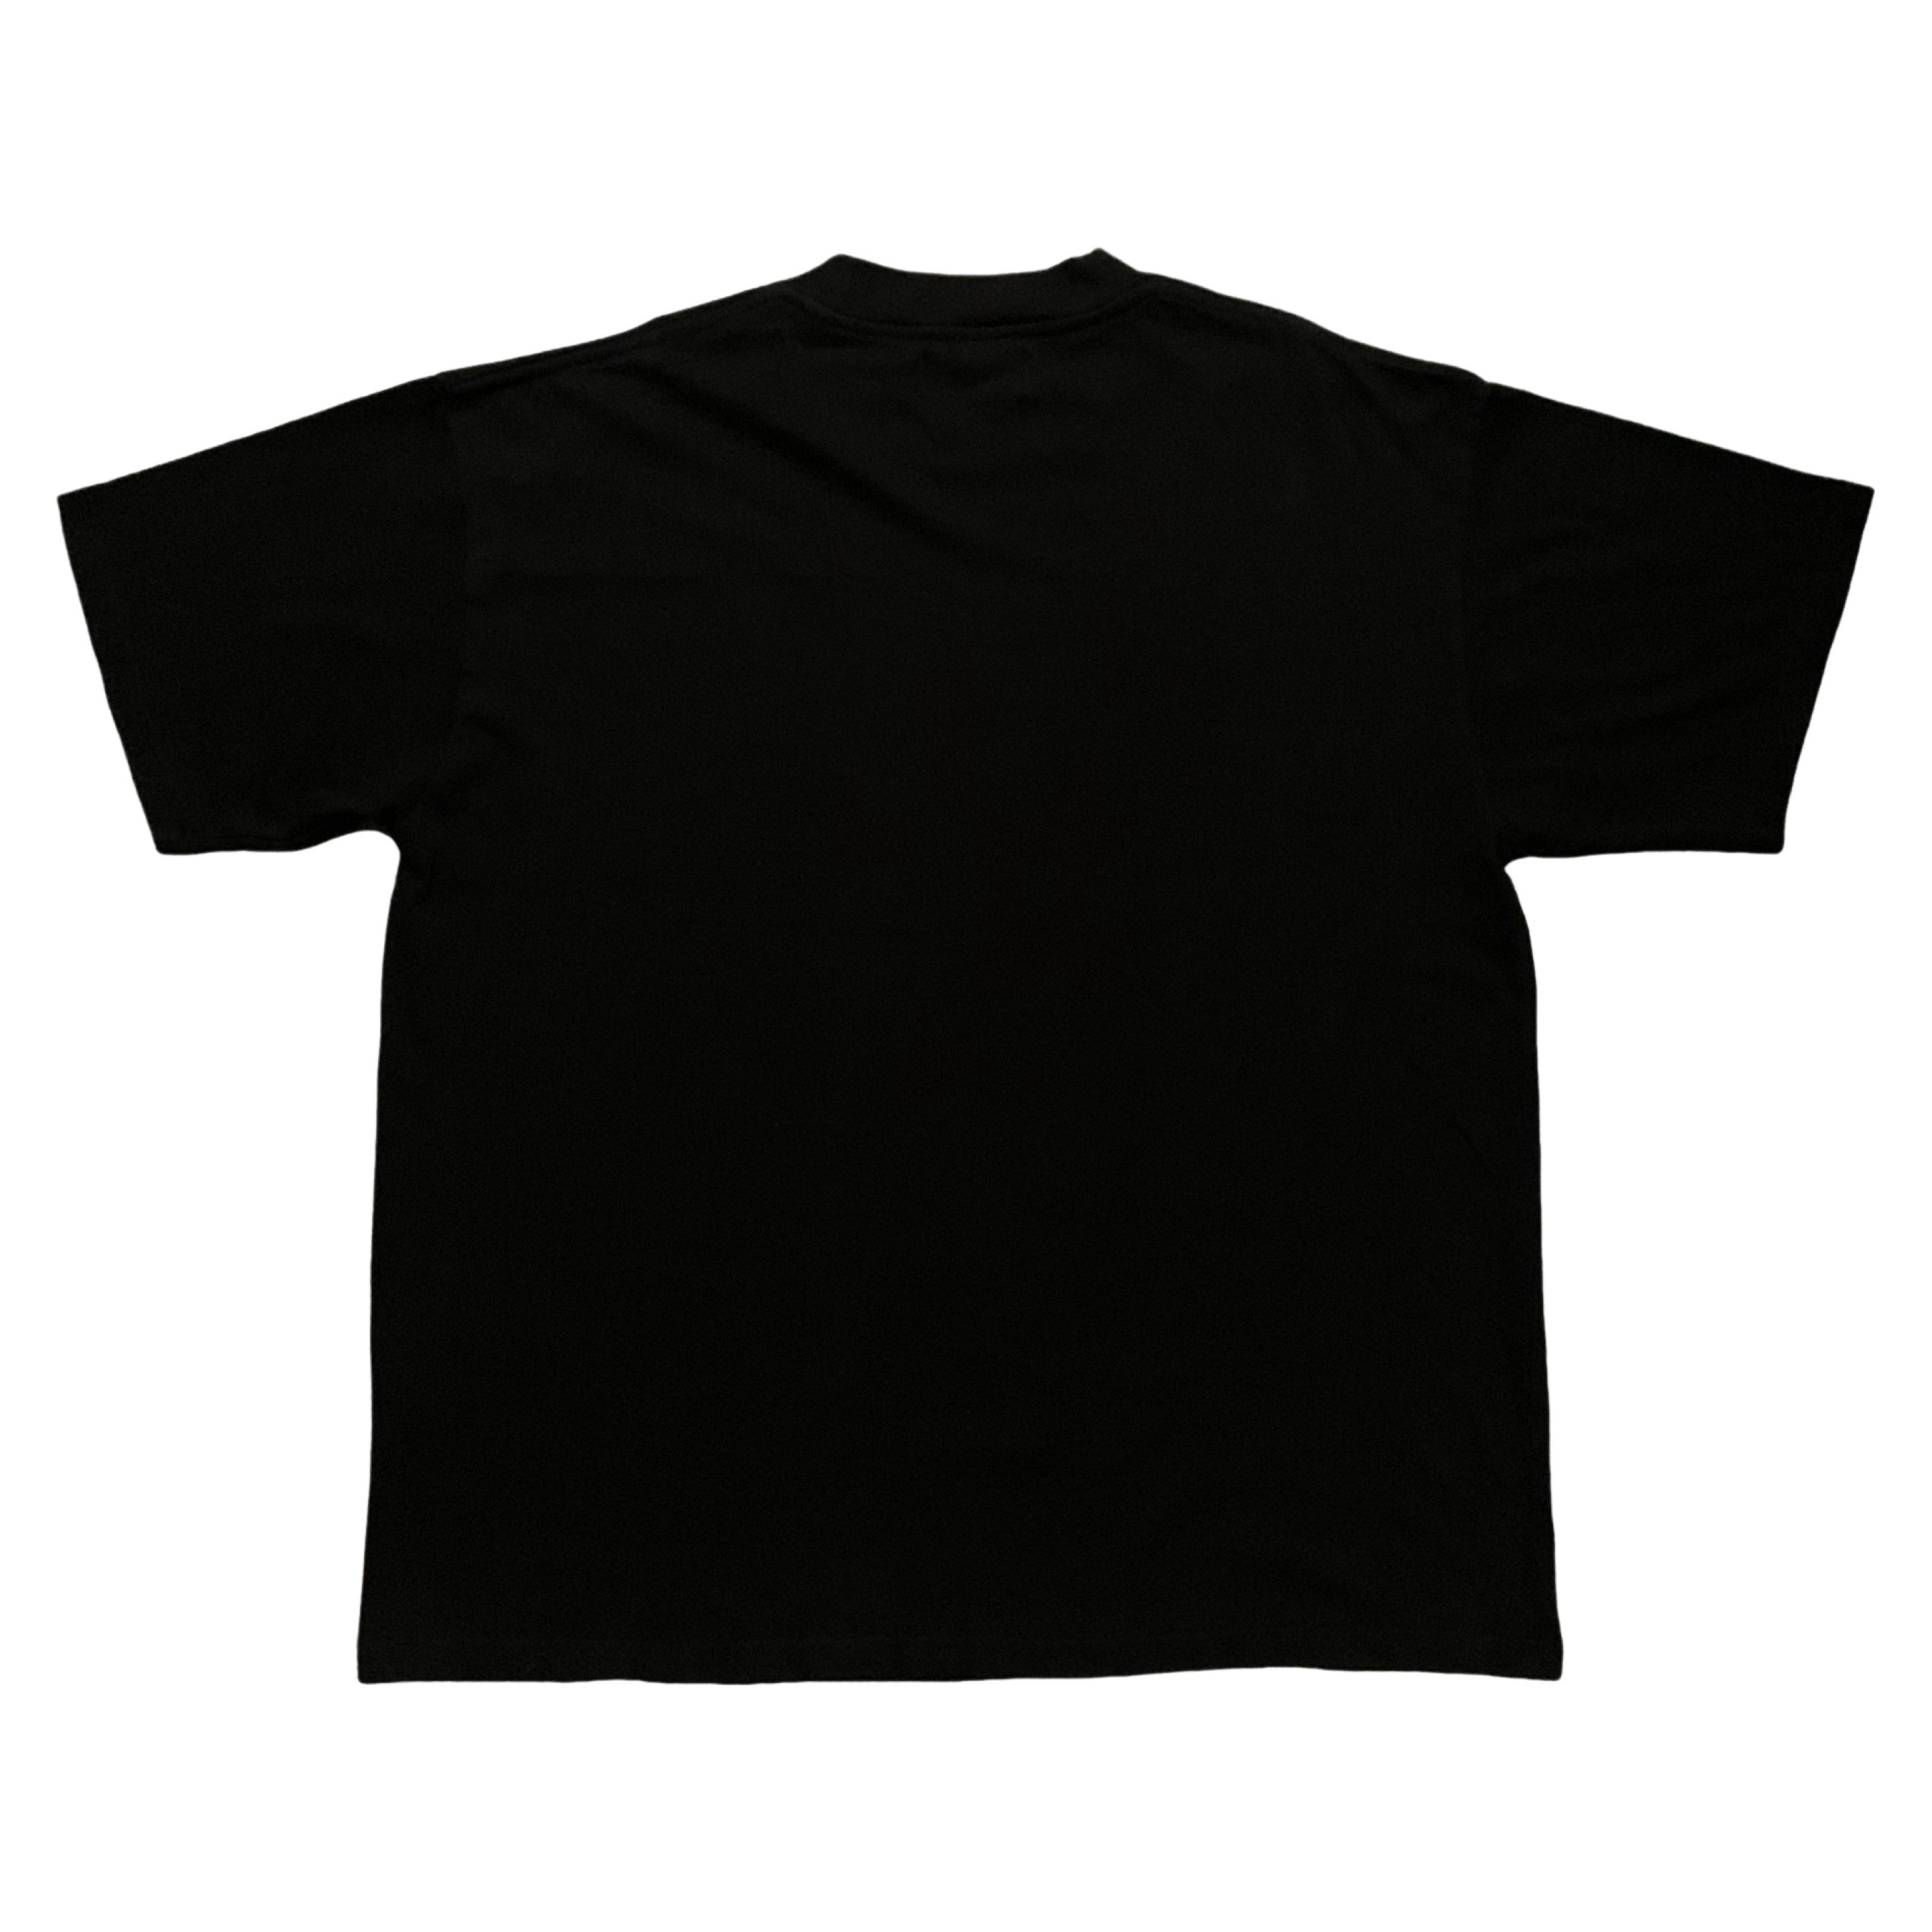 Represent XL Welcome To The Jungle Jet Black Tee